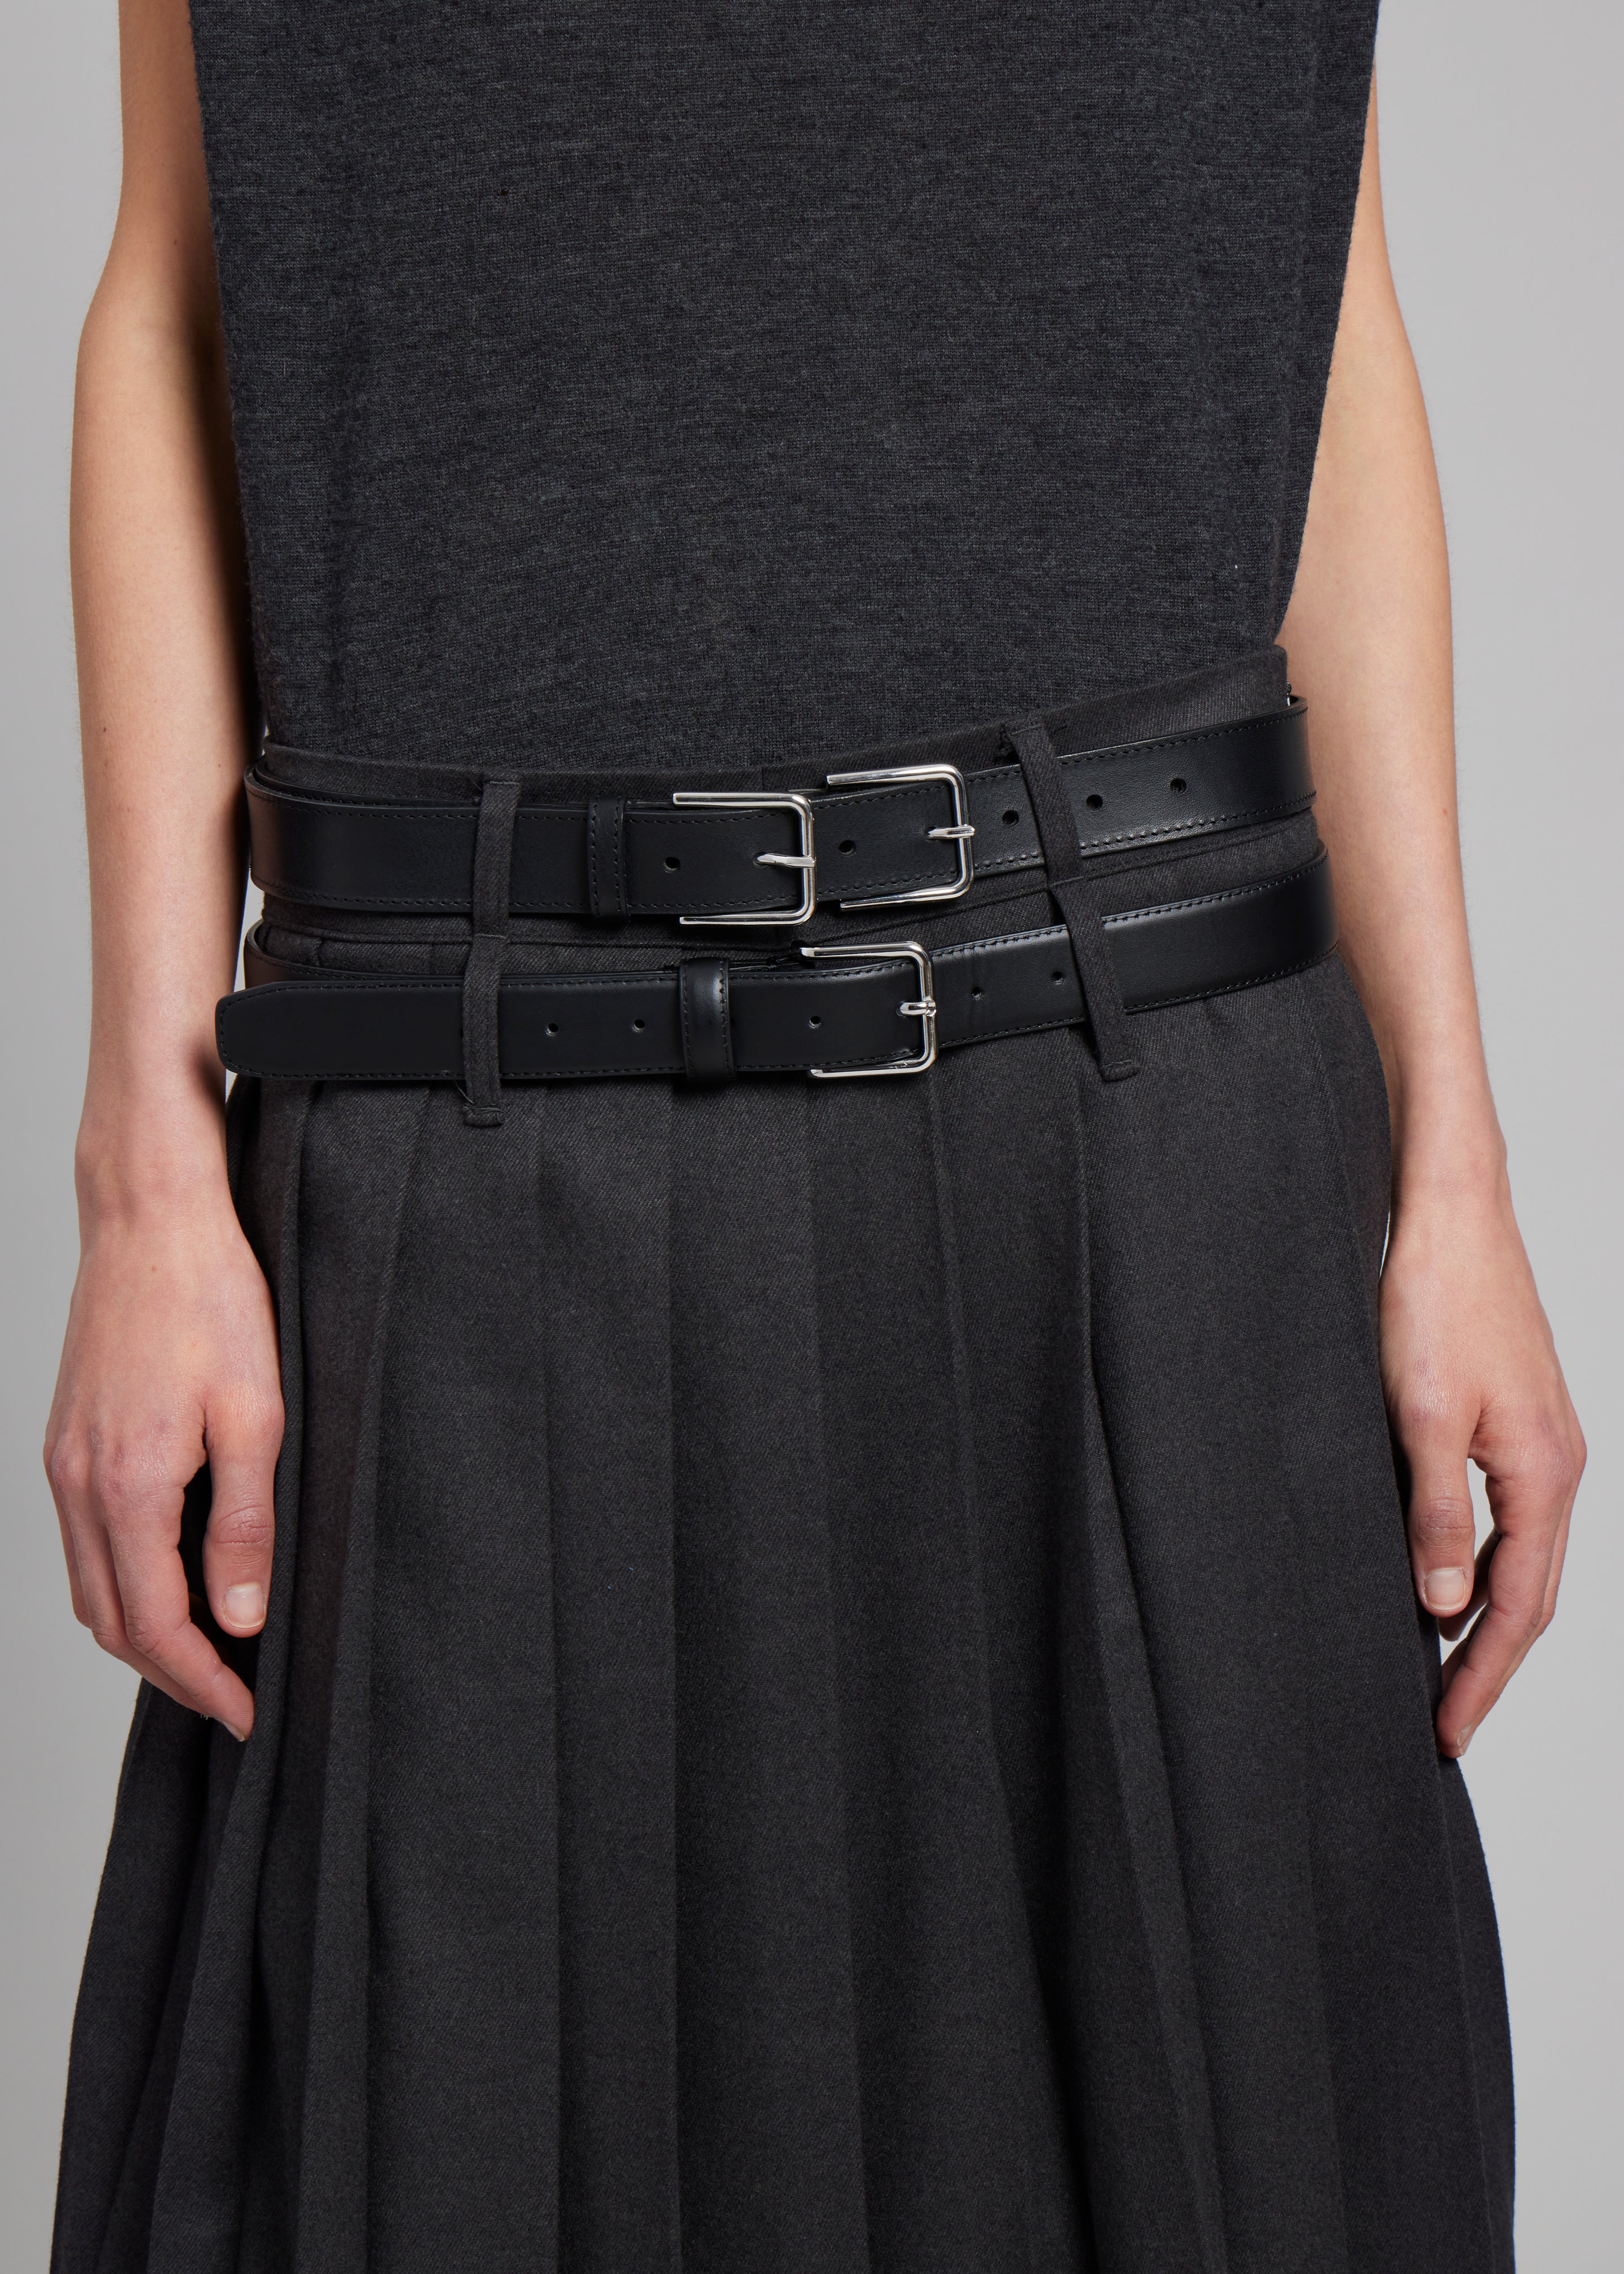 Willow Double Buckle Leather Belt - Black - 3